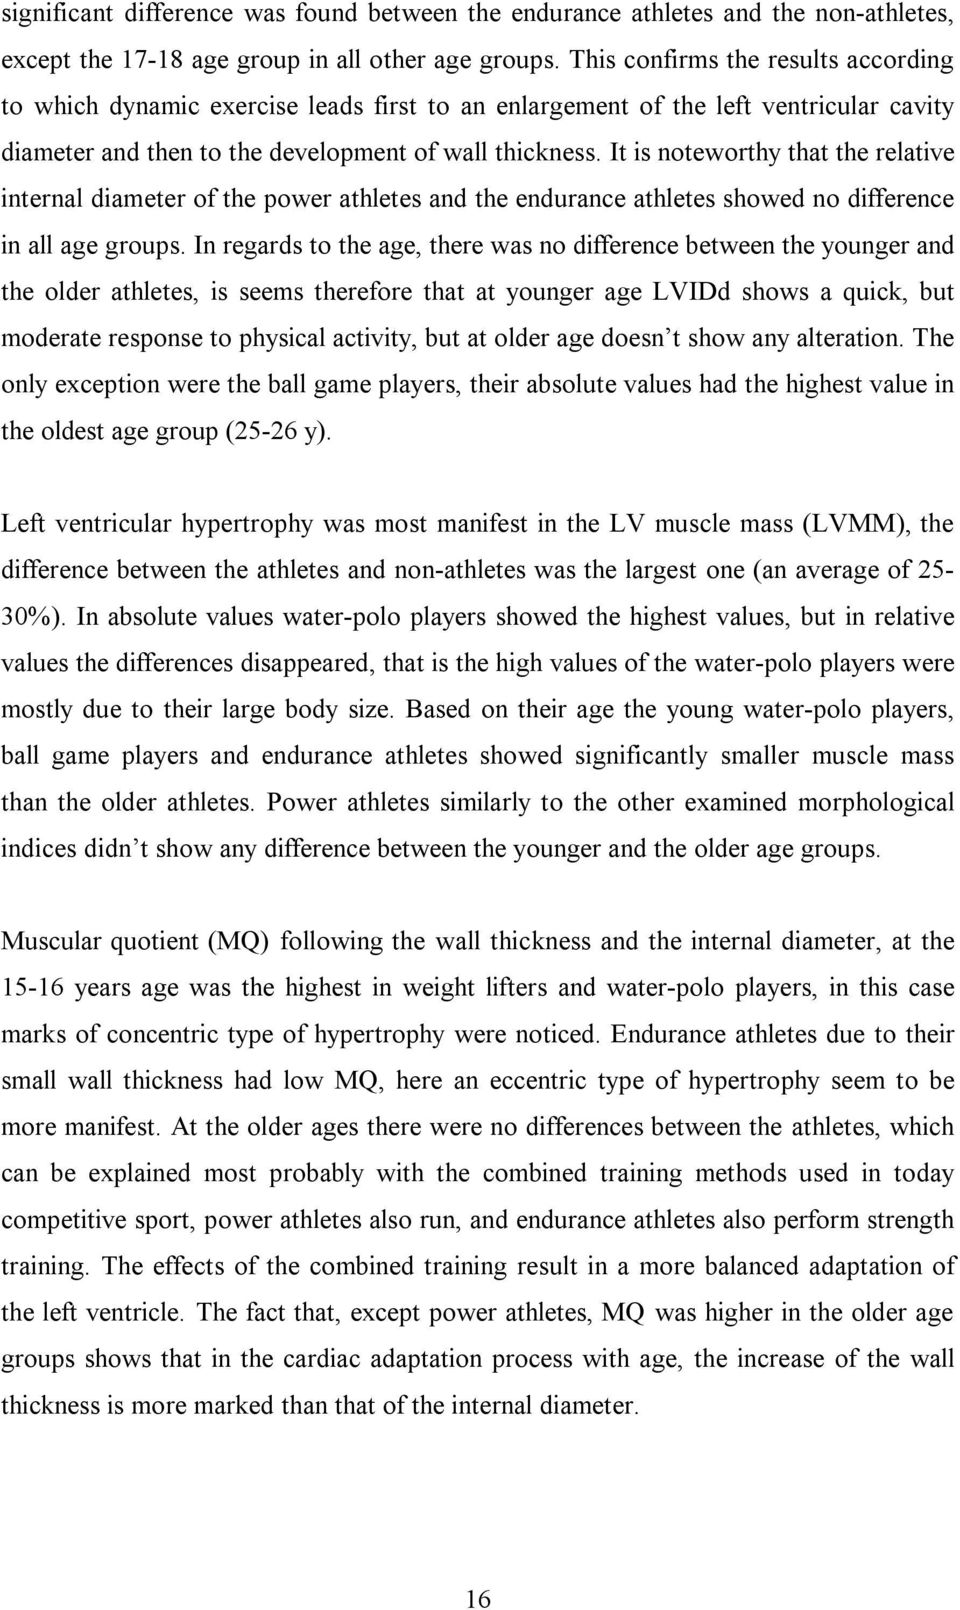 It is noteworthy that the relative internal diameter of the power athletes and the endurance athletes showed no difference in all age groups.